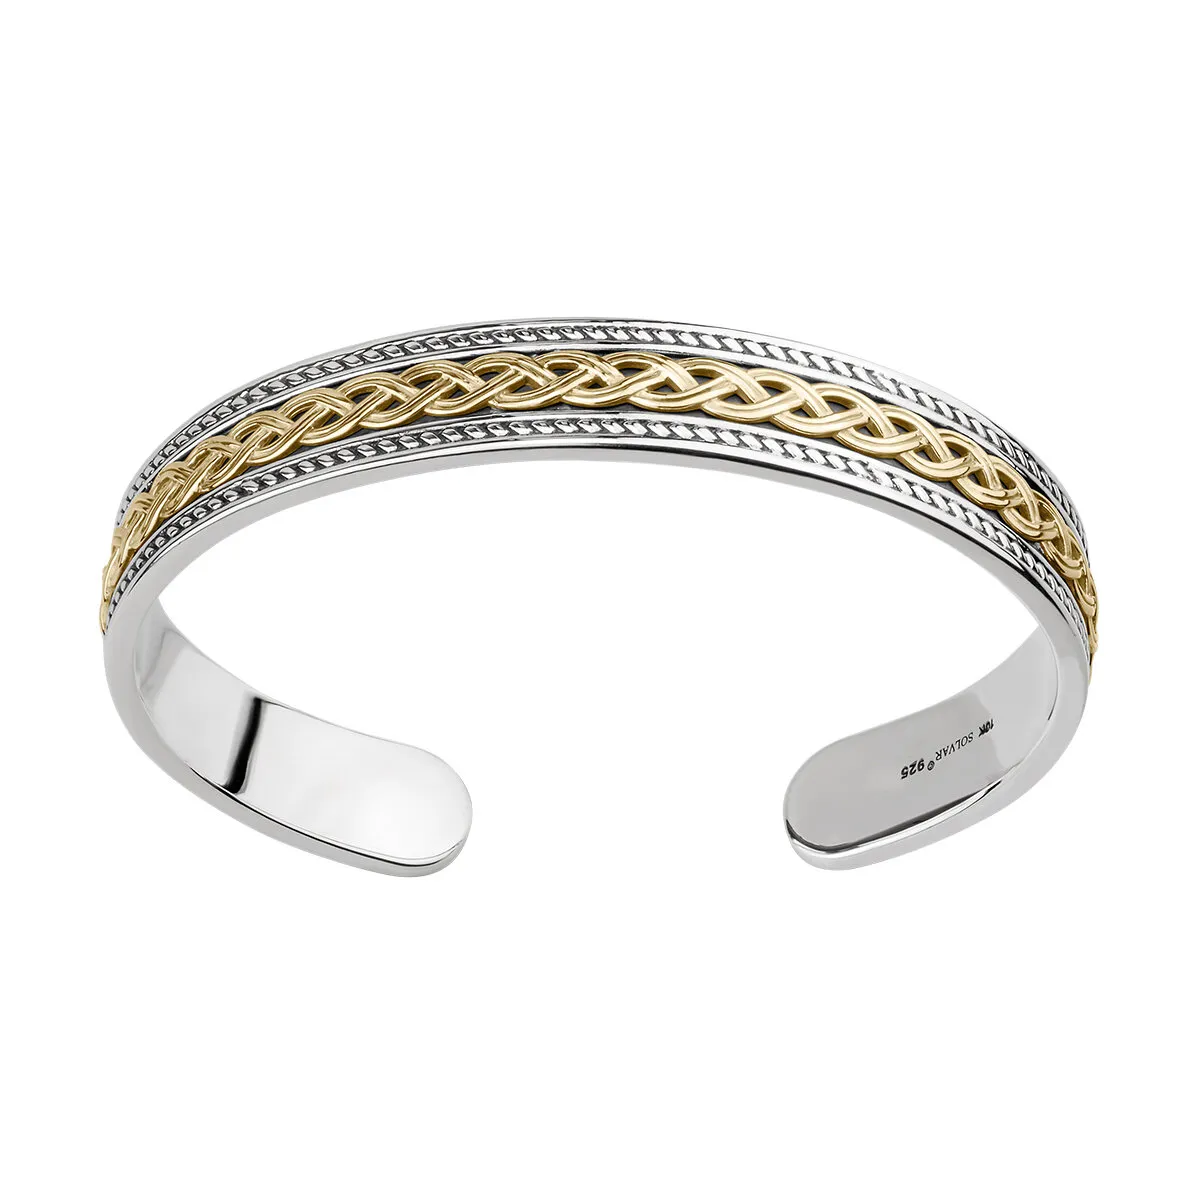 Gents 10k Gold and Silver Celtic Knot Bangle...